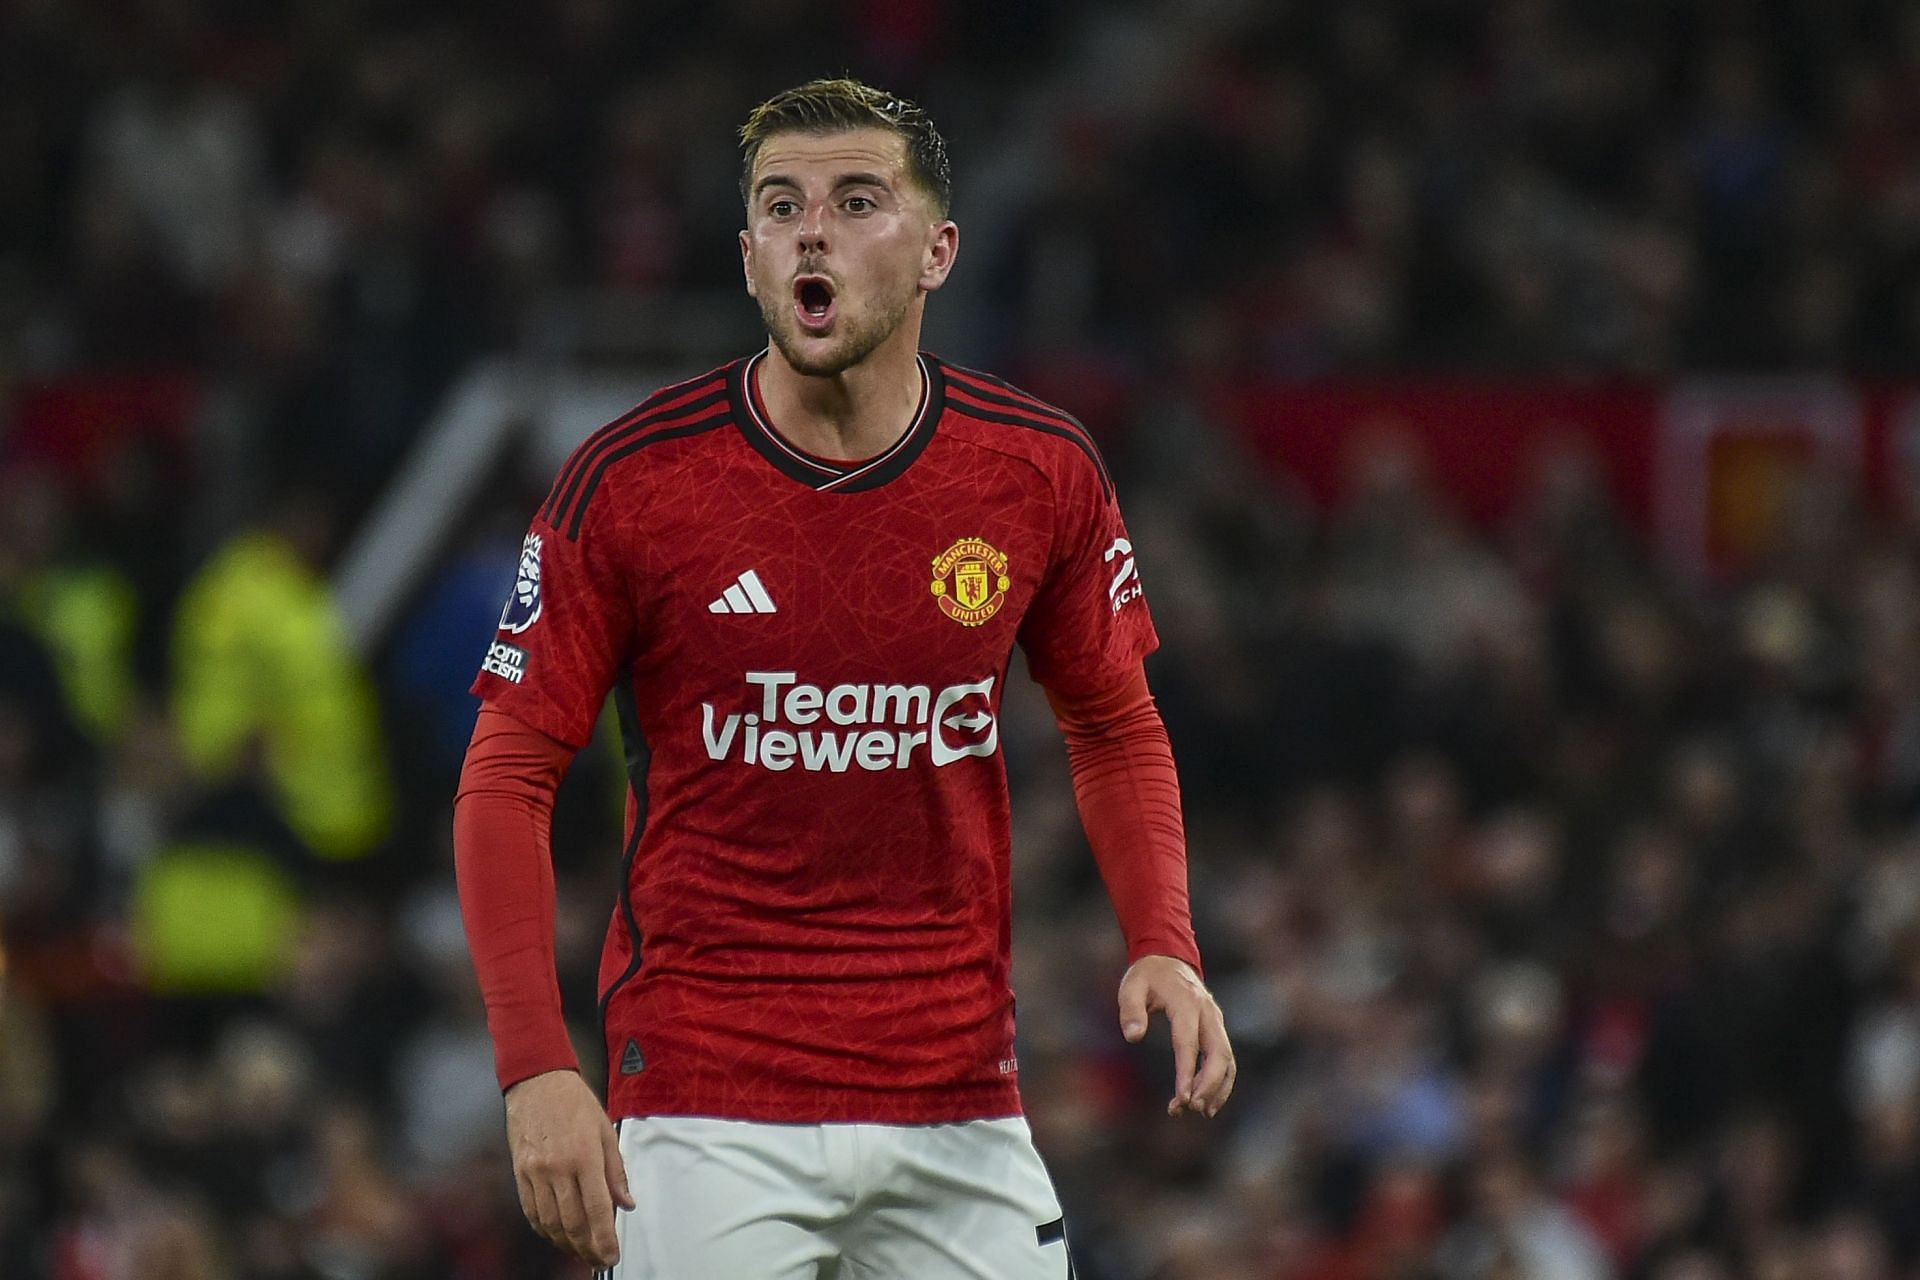 Mason Mount&rsquo;s start to life at Old Trafford hasn&rsquo;t been rosy.